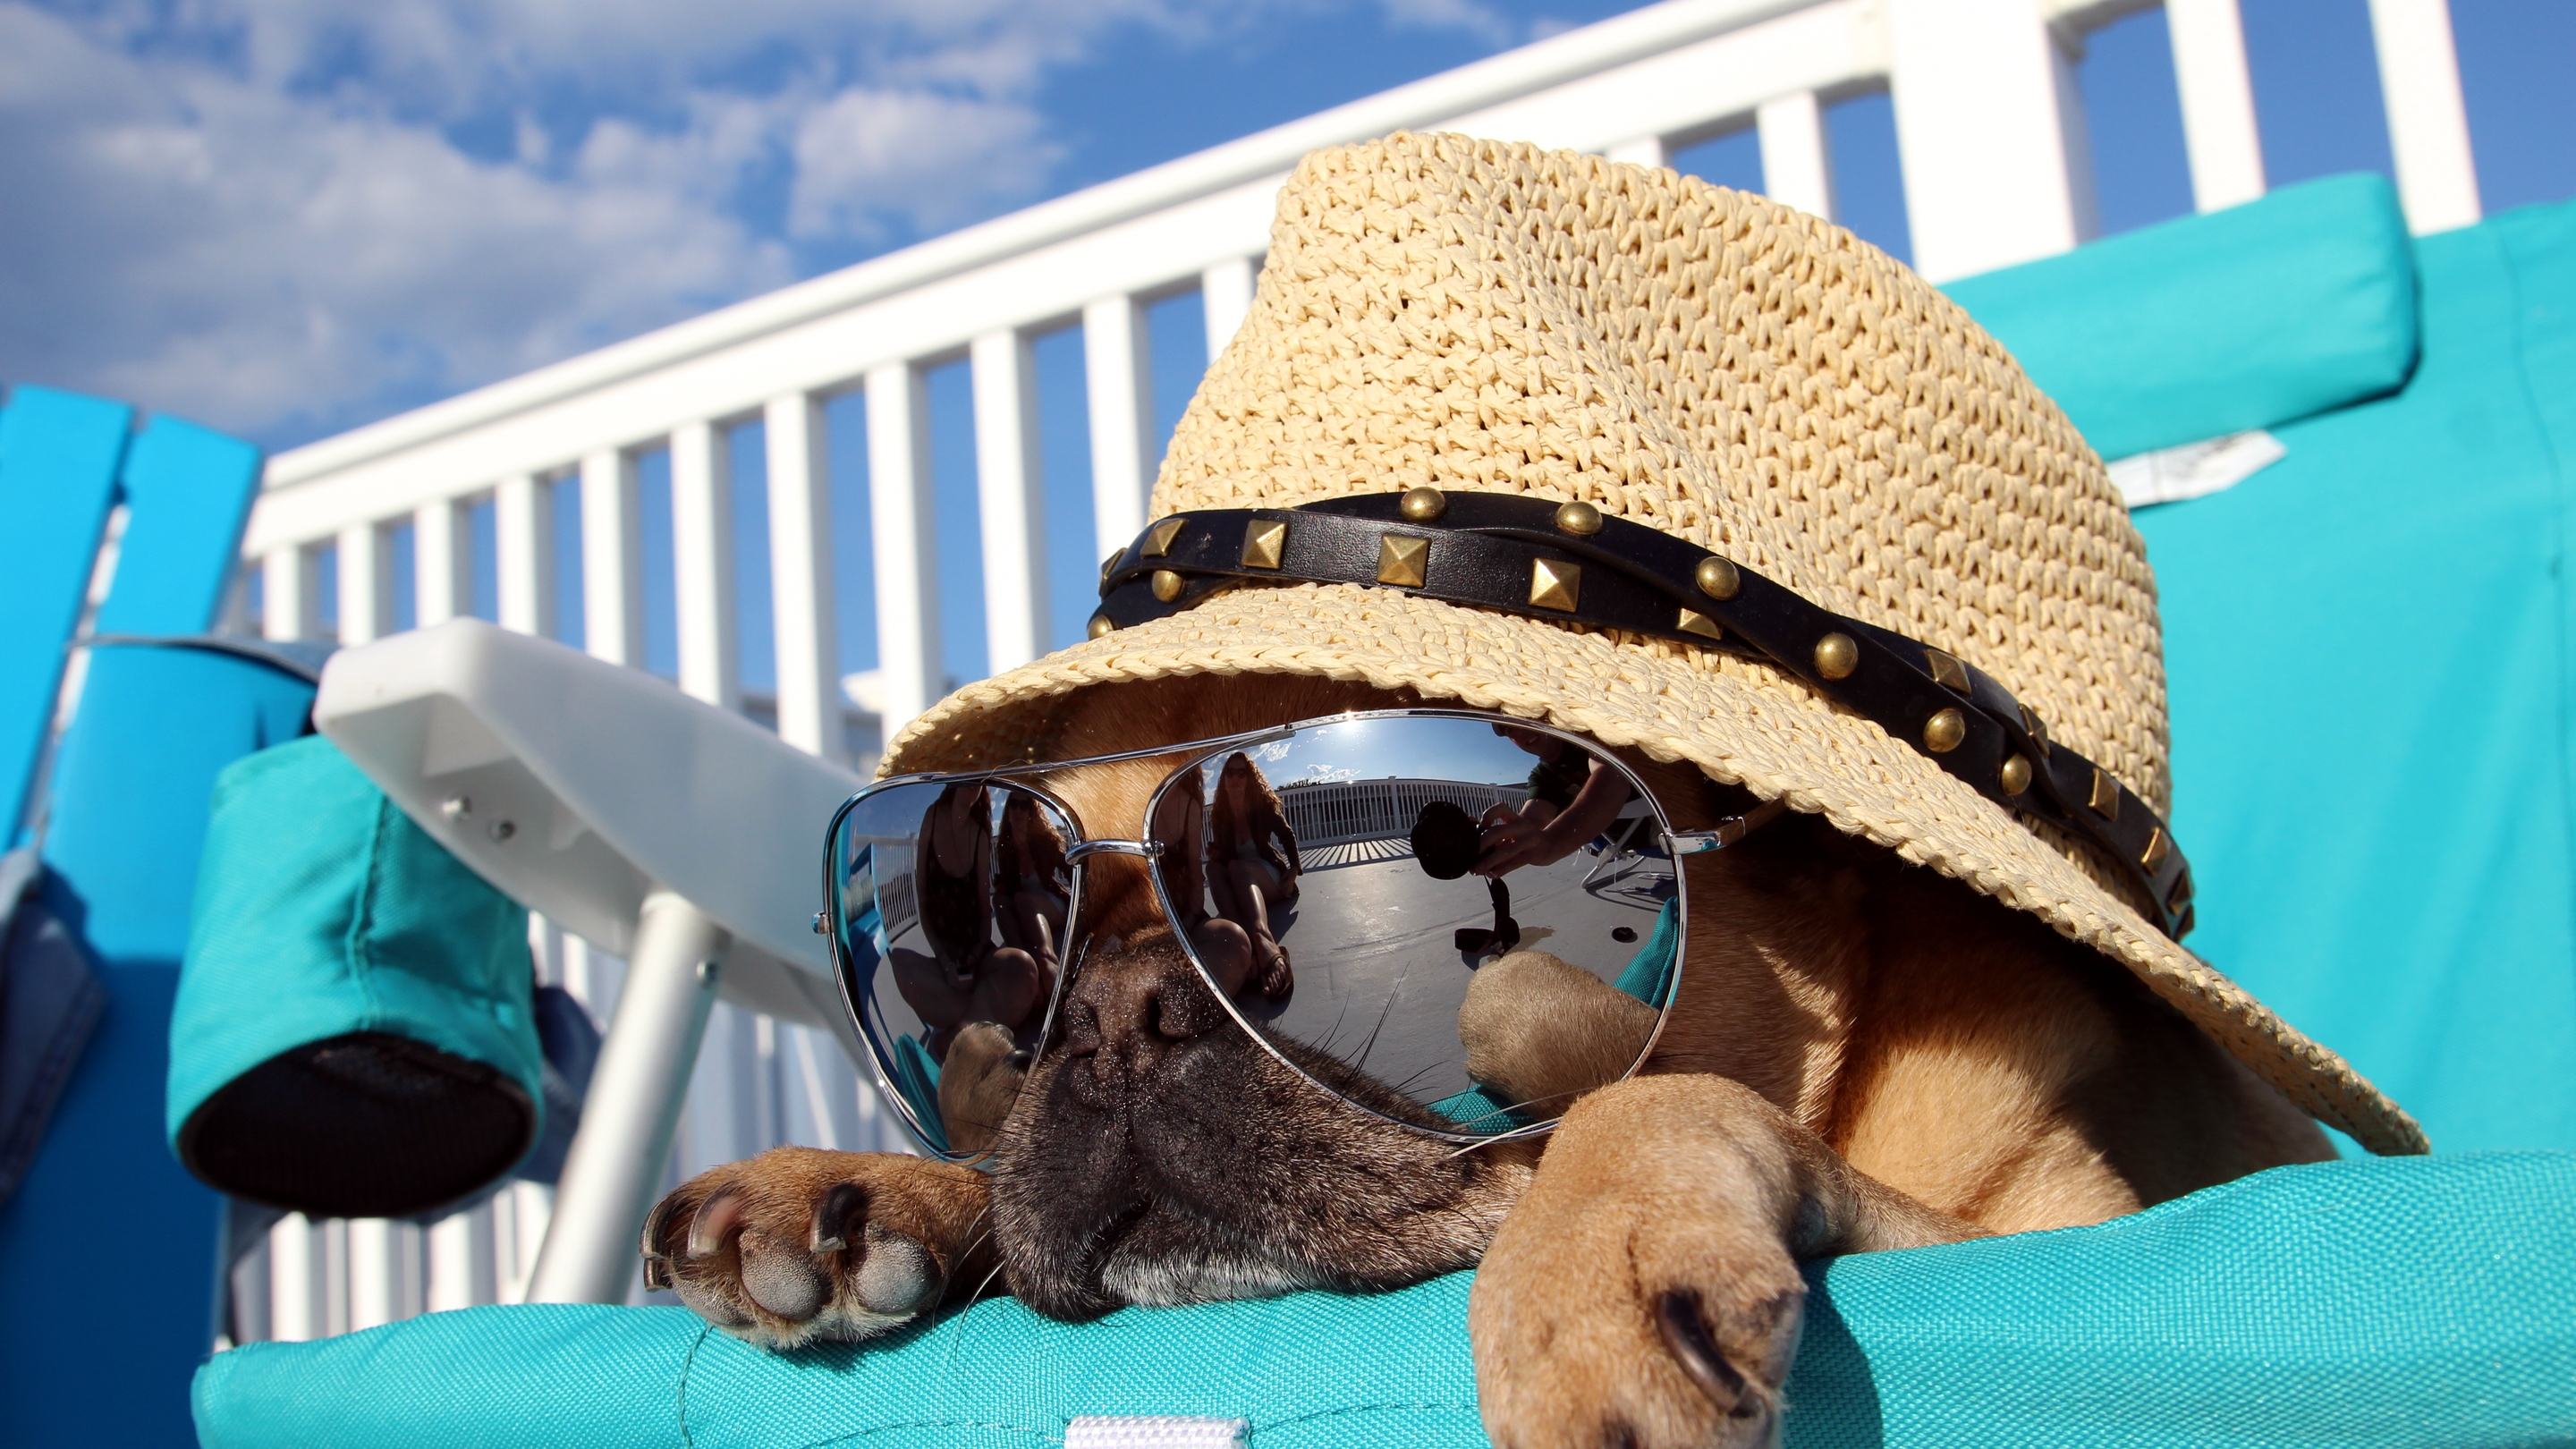 Image: Dog, hat, glasses, reflection, lies, sunbed, vacation, sky, clouds